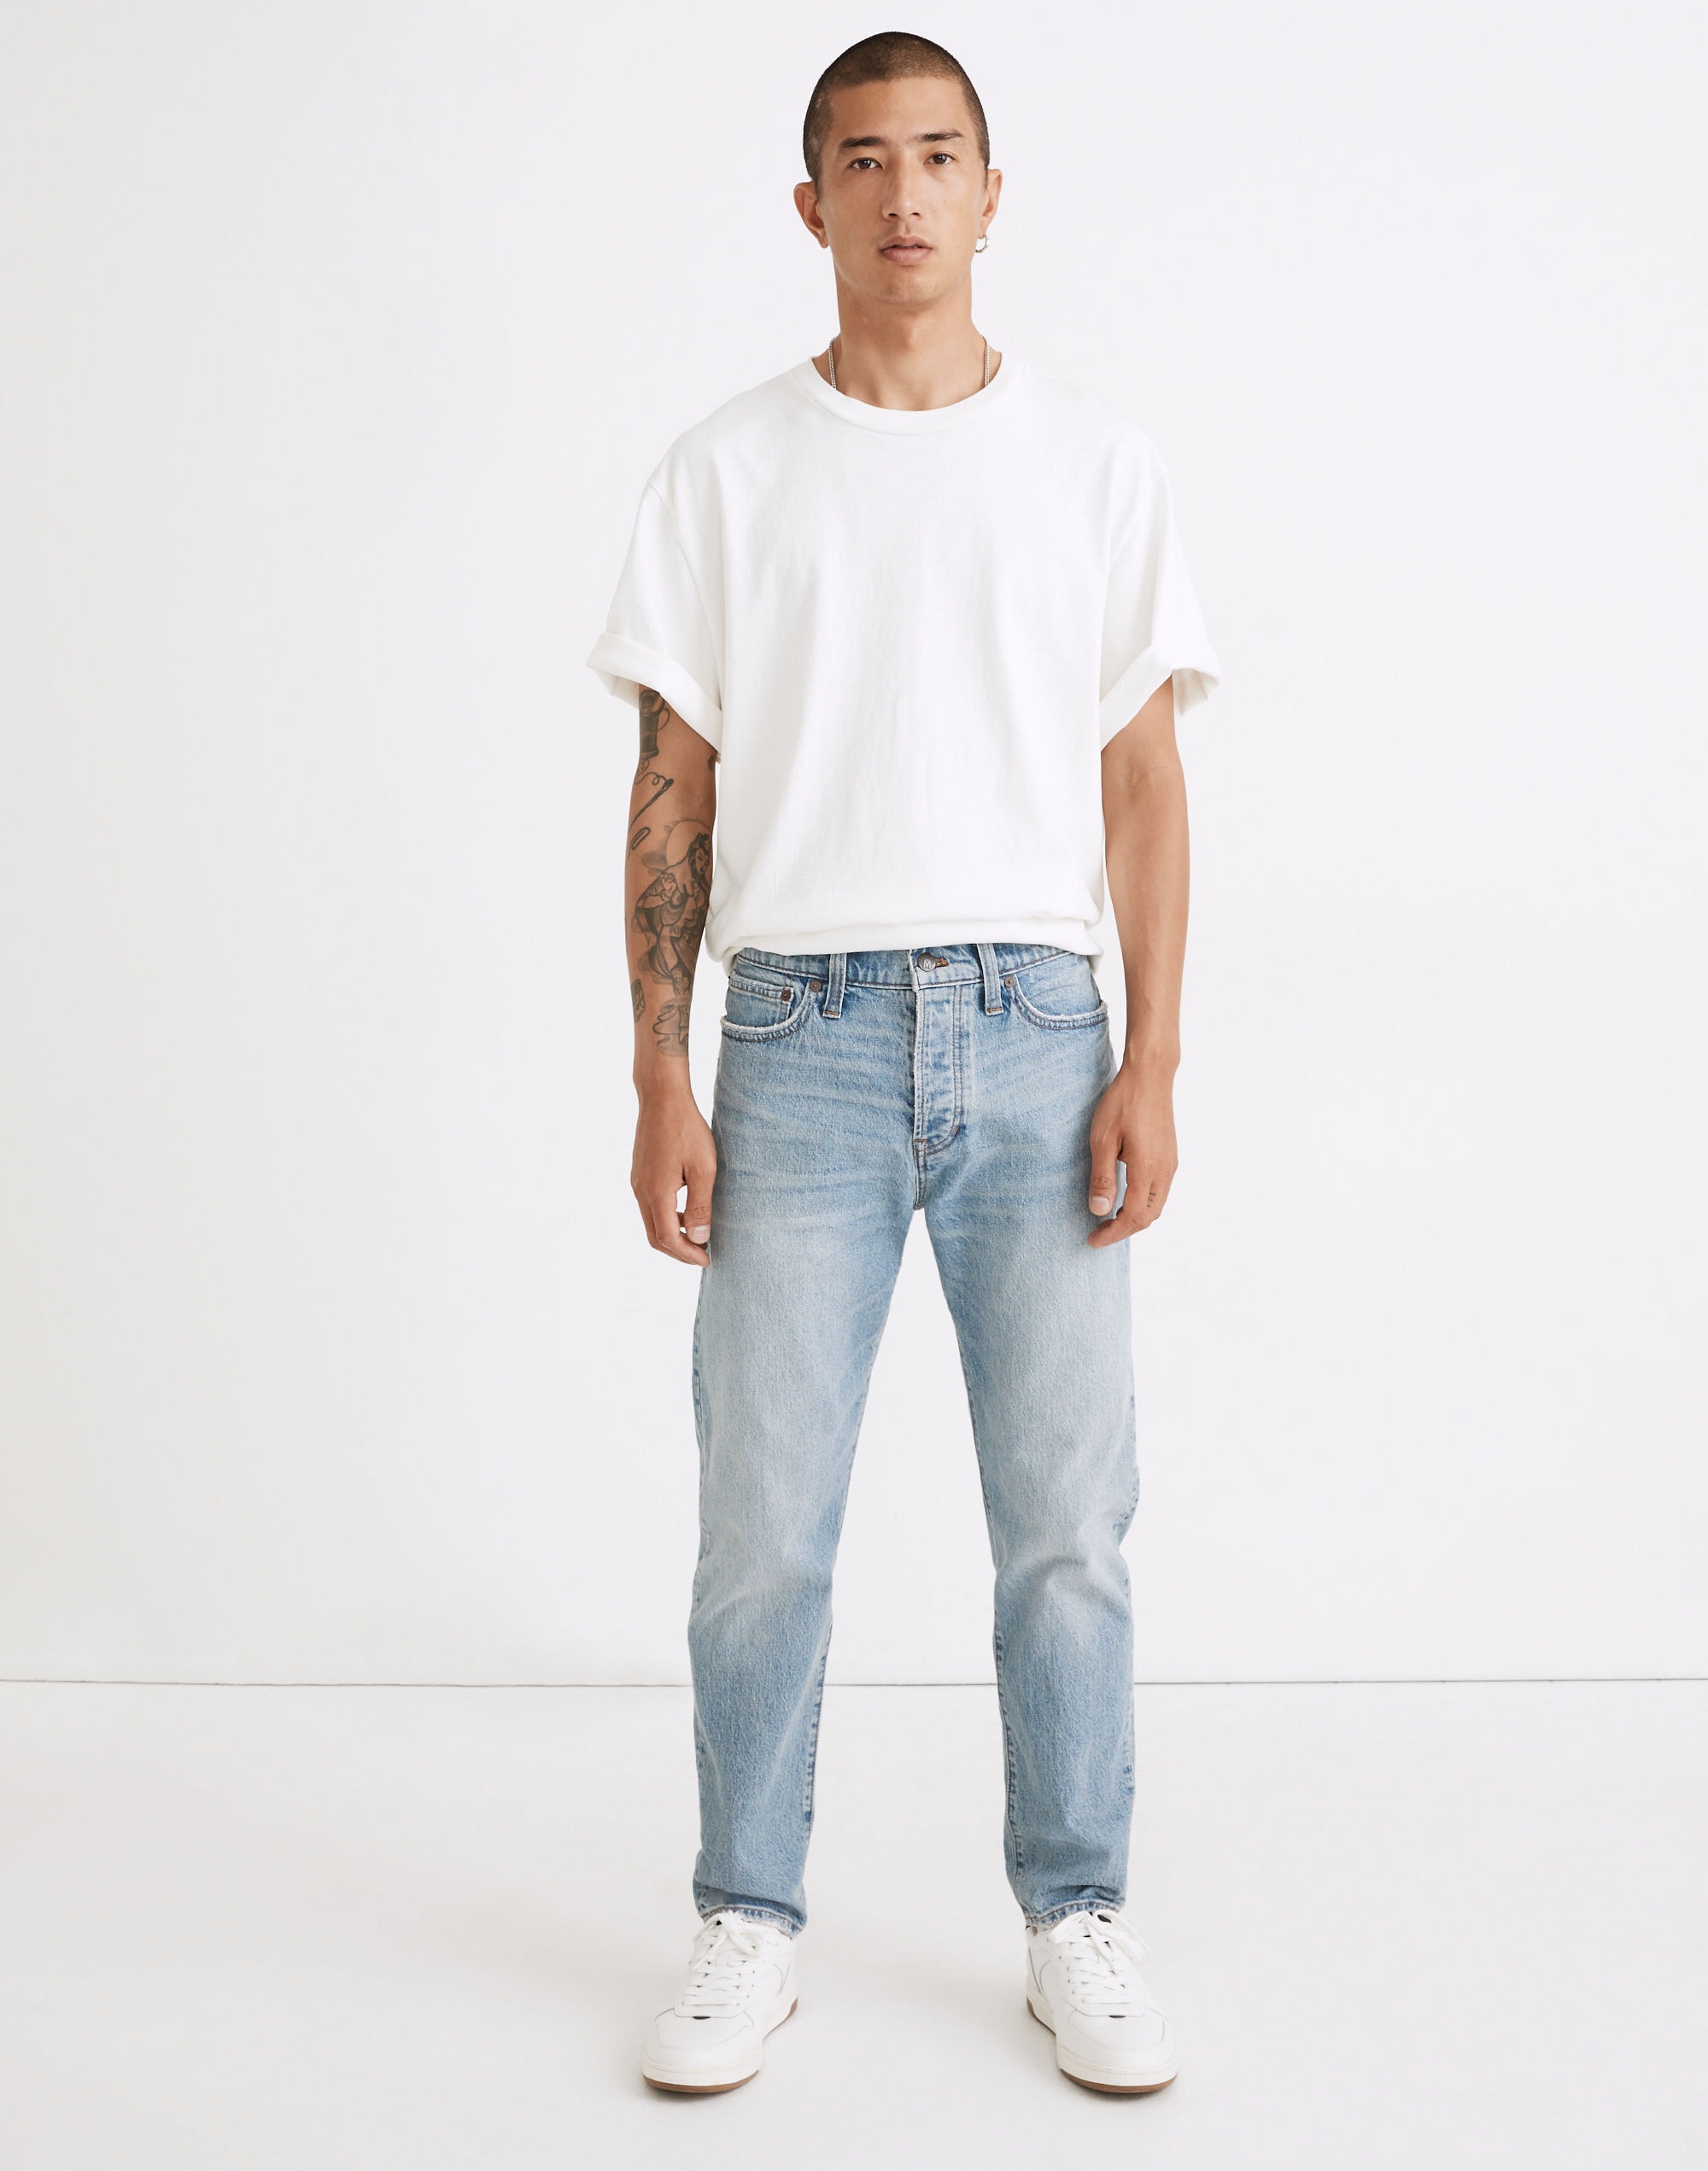 Relaxed Taper Jeans in Chadburn Wash